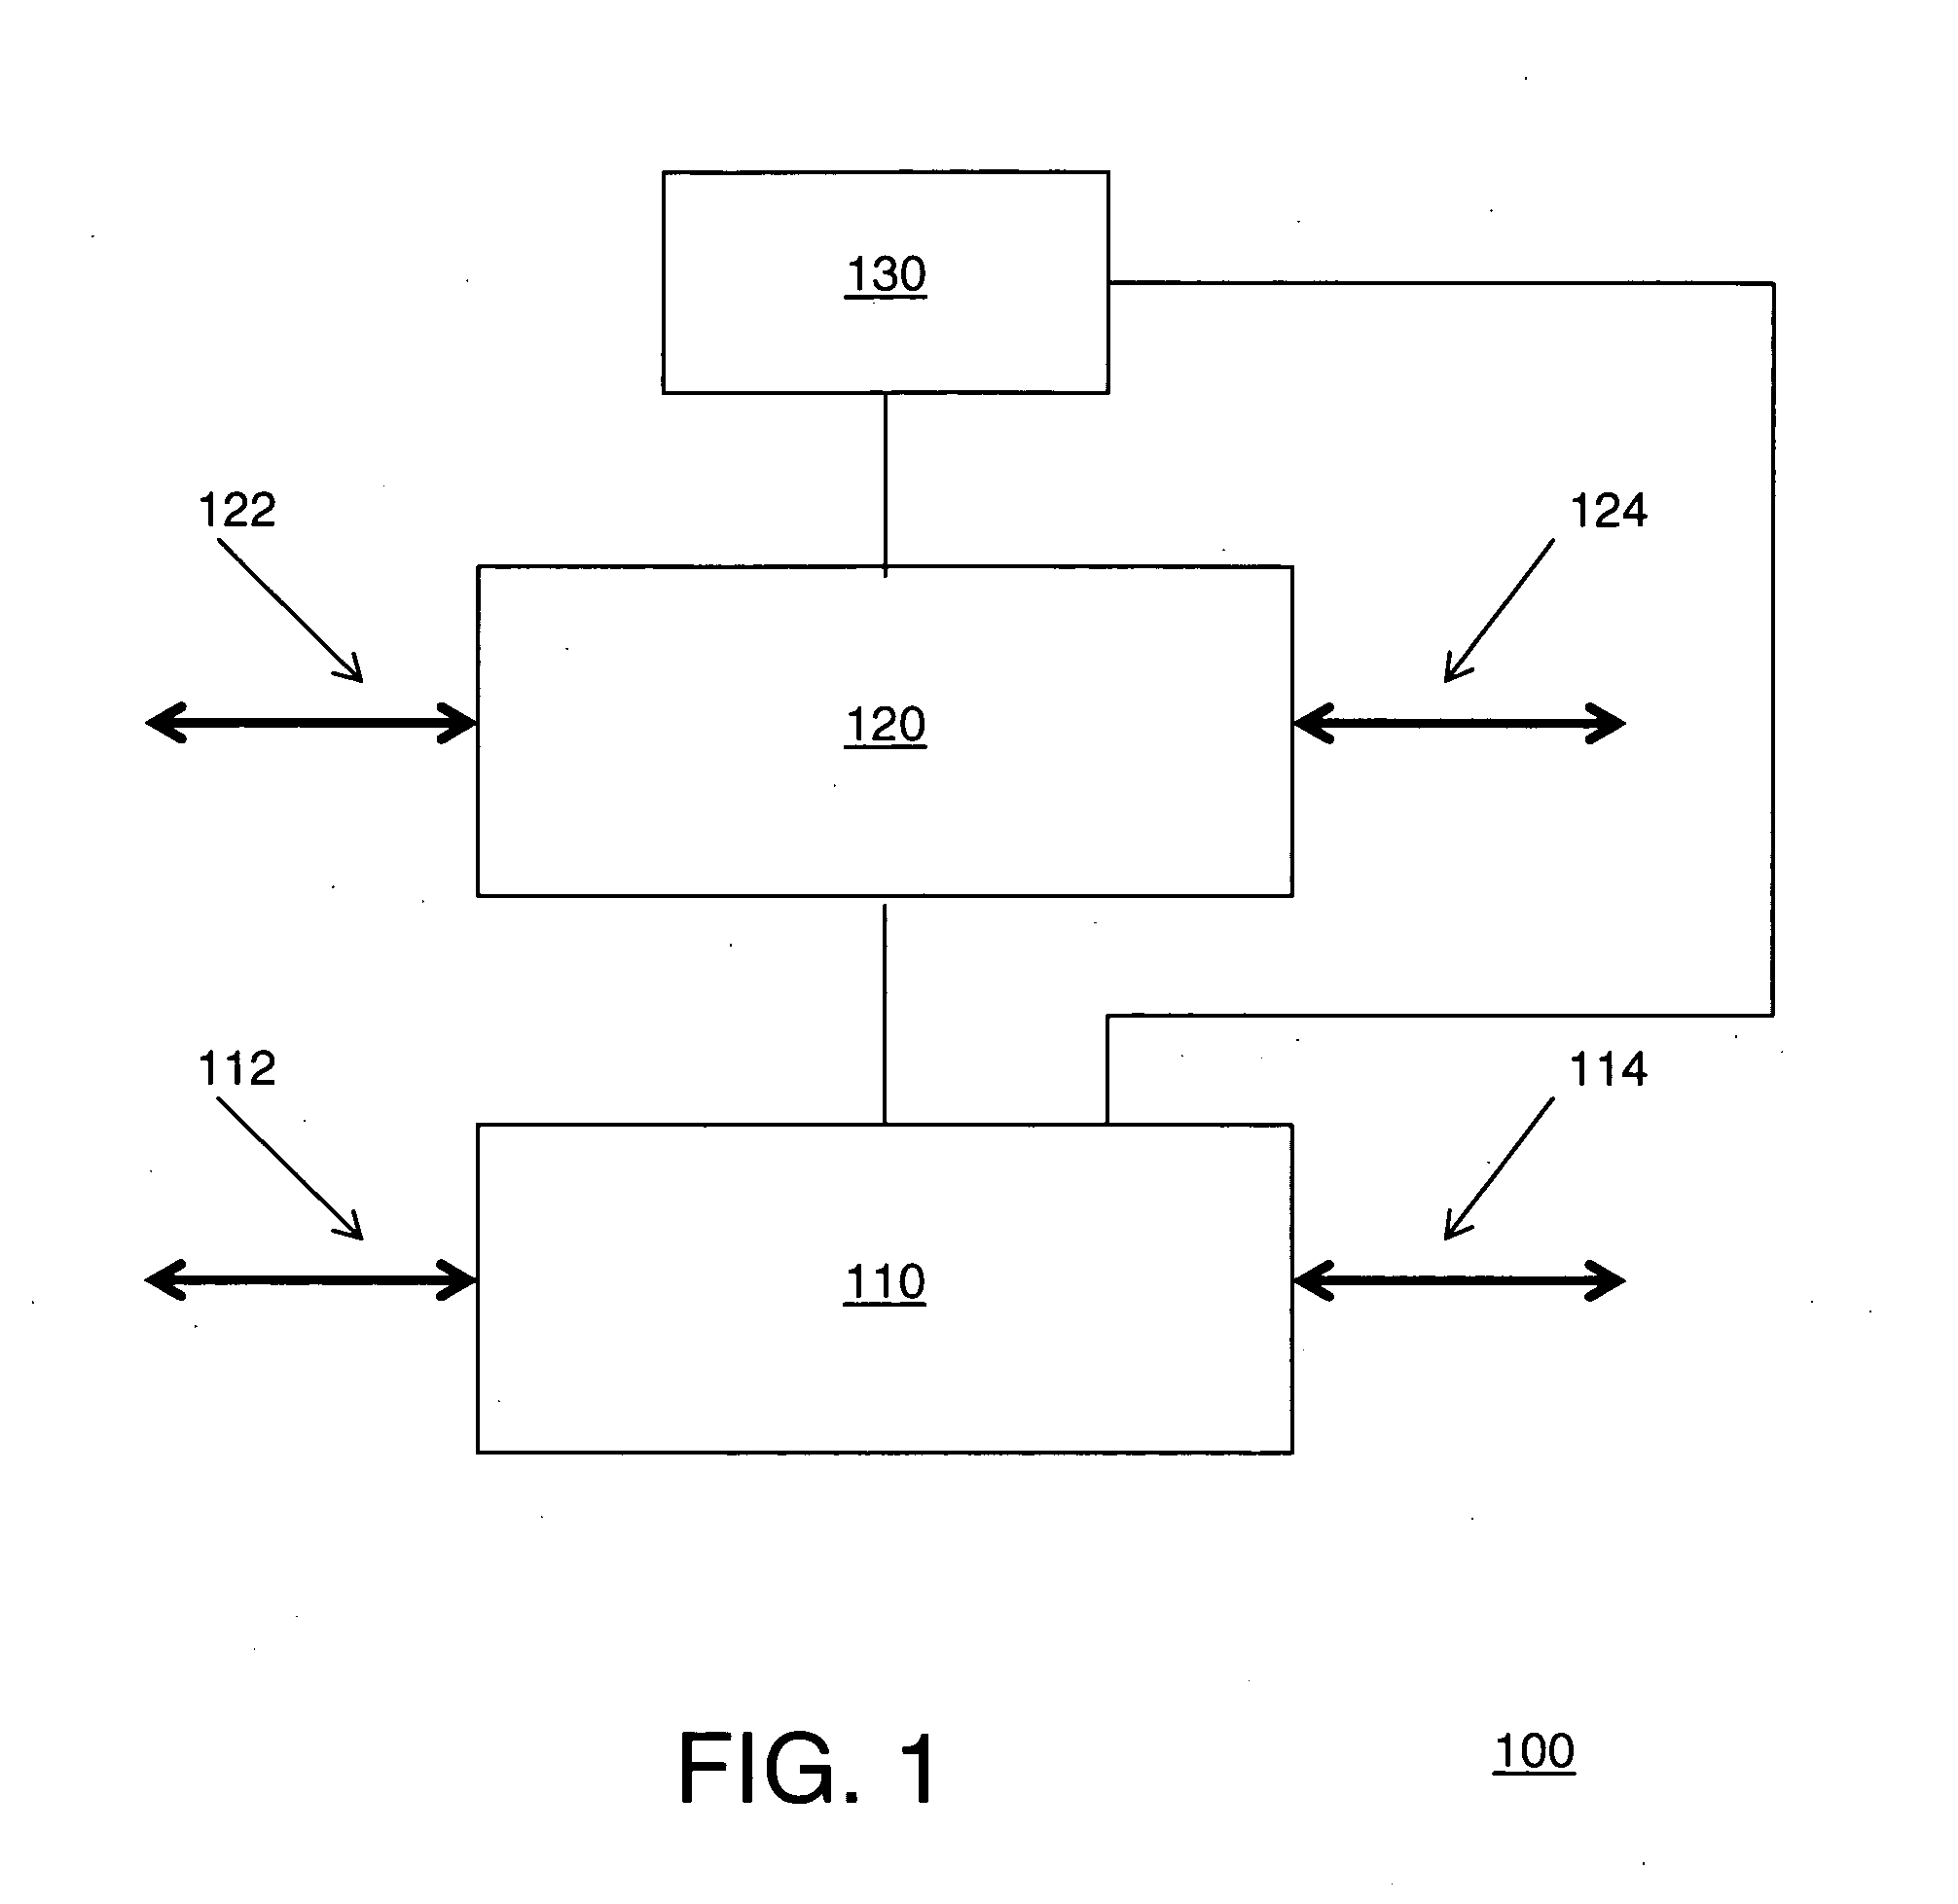 Wafer-to-wafer control using virtual modules